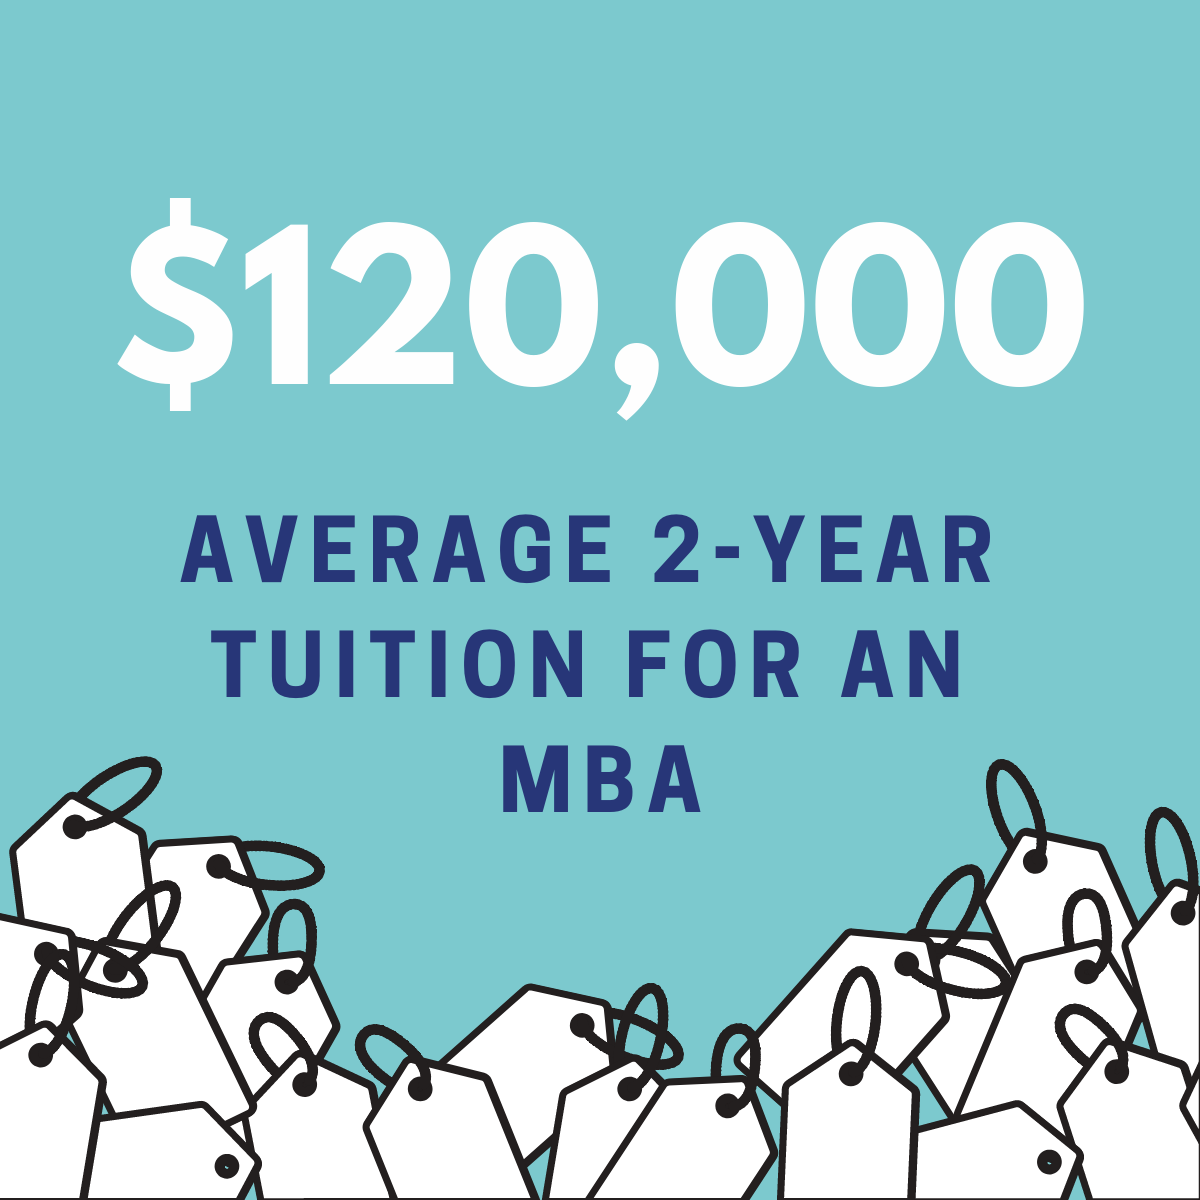 $120,000 average 2-year tuition for an MBA